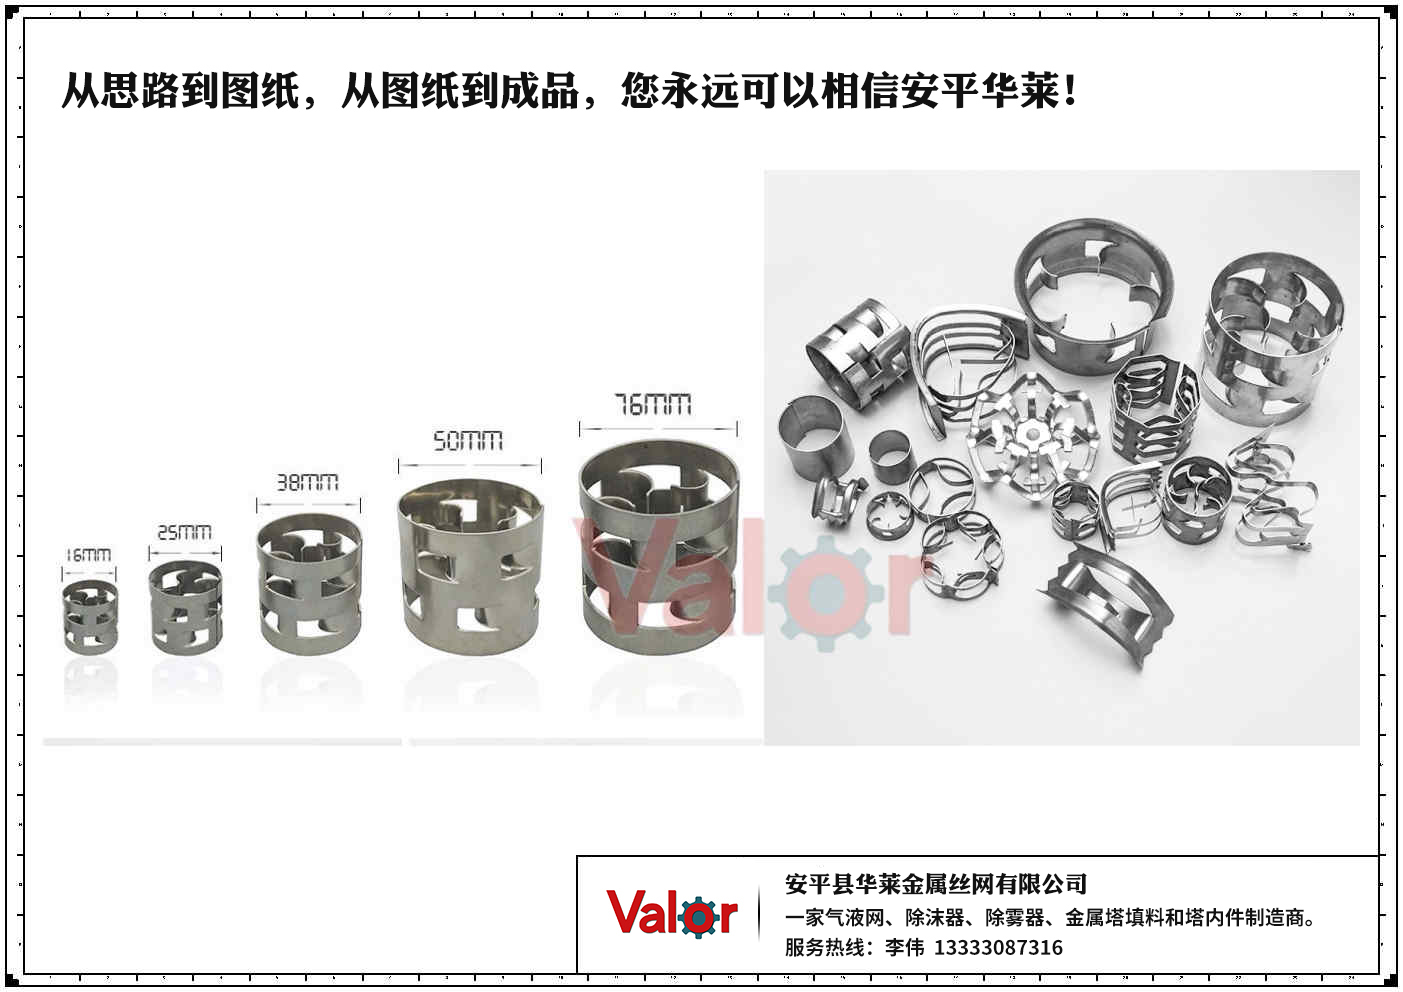 various kinds of metal random packing in production and sale